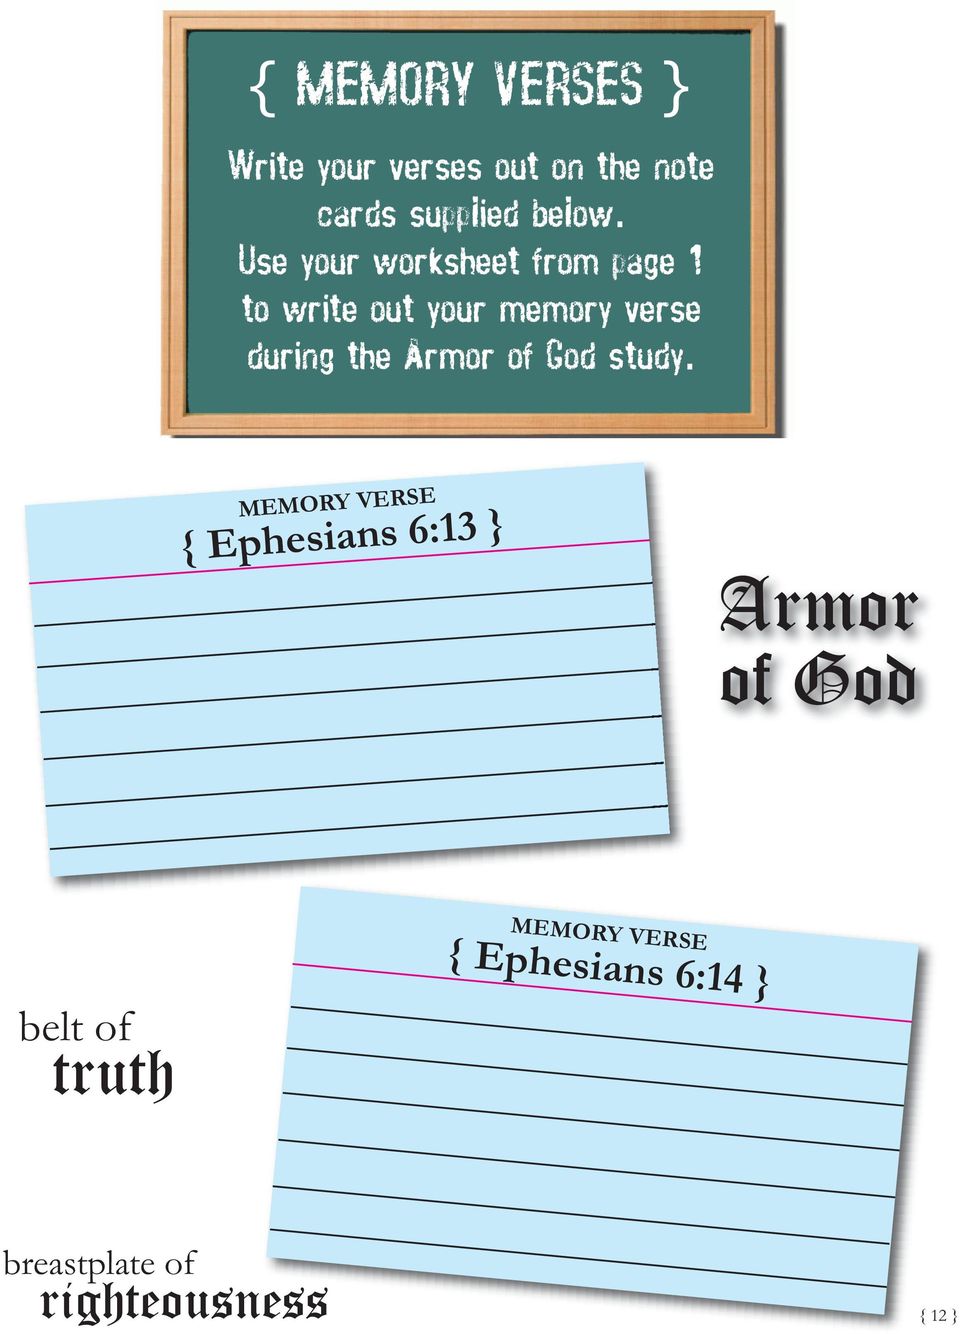 Use your worksheet from page 1 to write out your memory verse